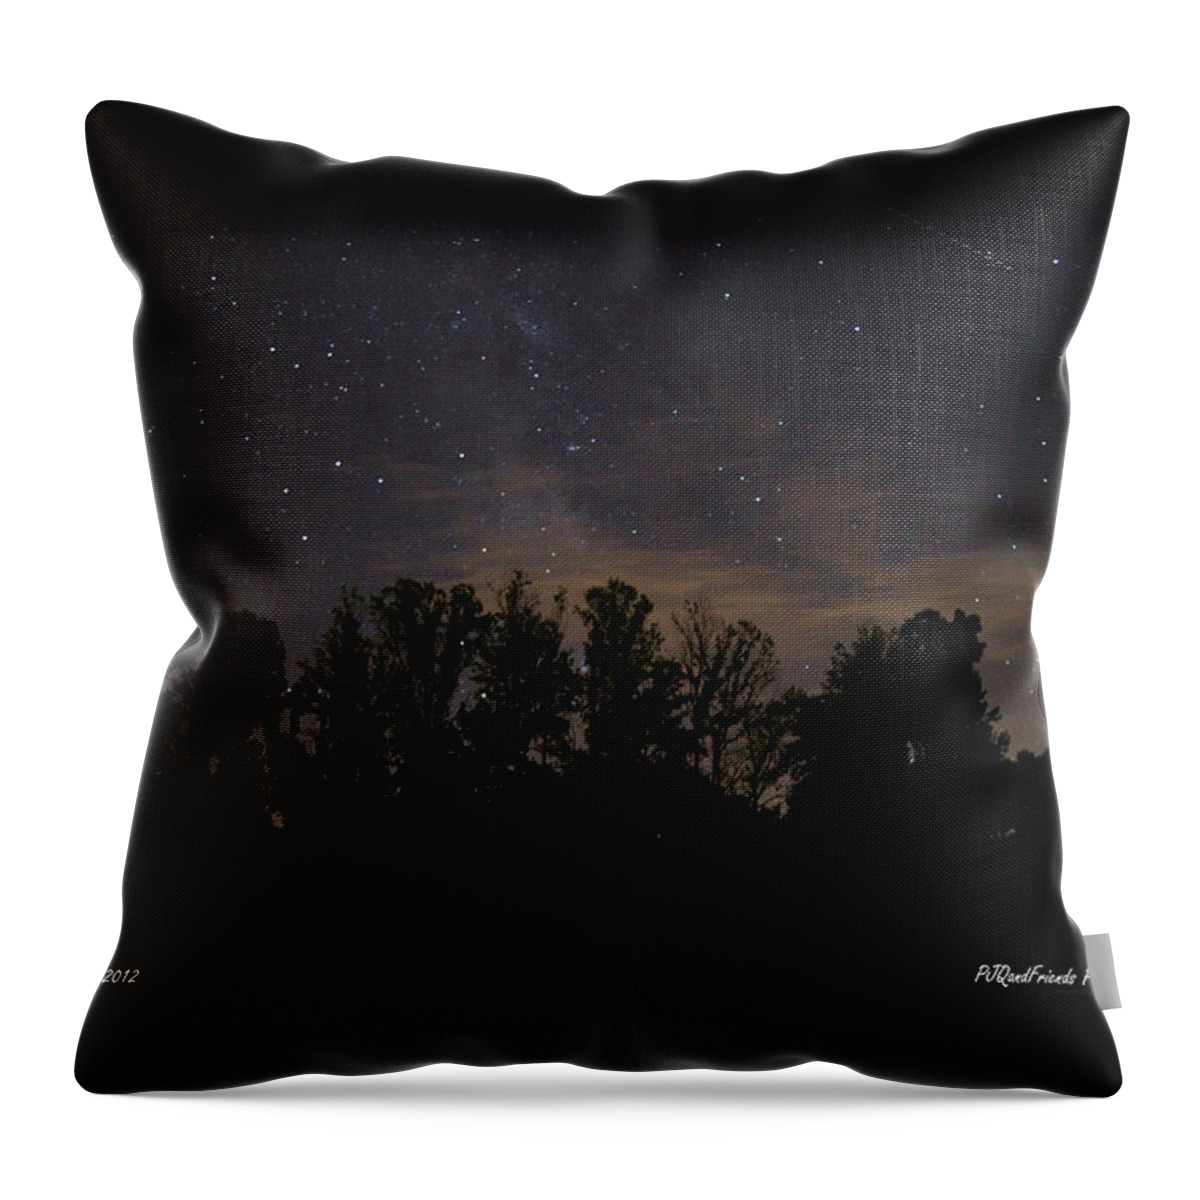 Perseid Meteor Shower Throw Pillow featuring the photograph Perseid Meteor in Milky Way by PJQandFriends Photography